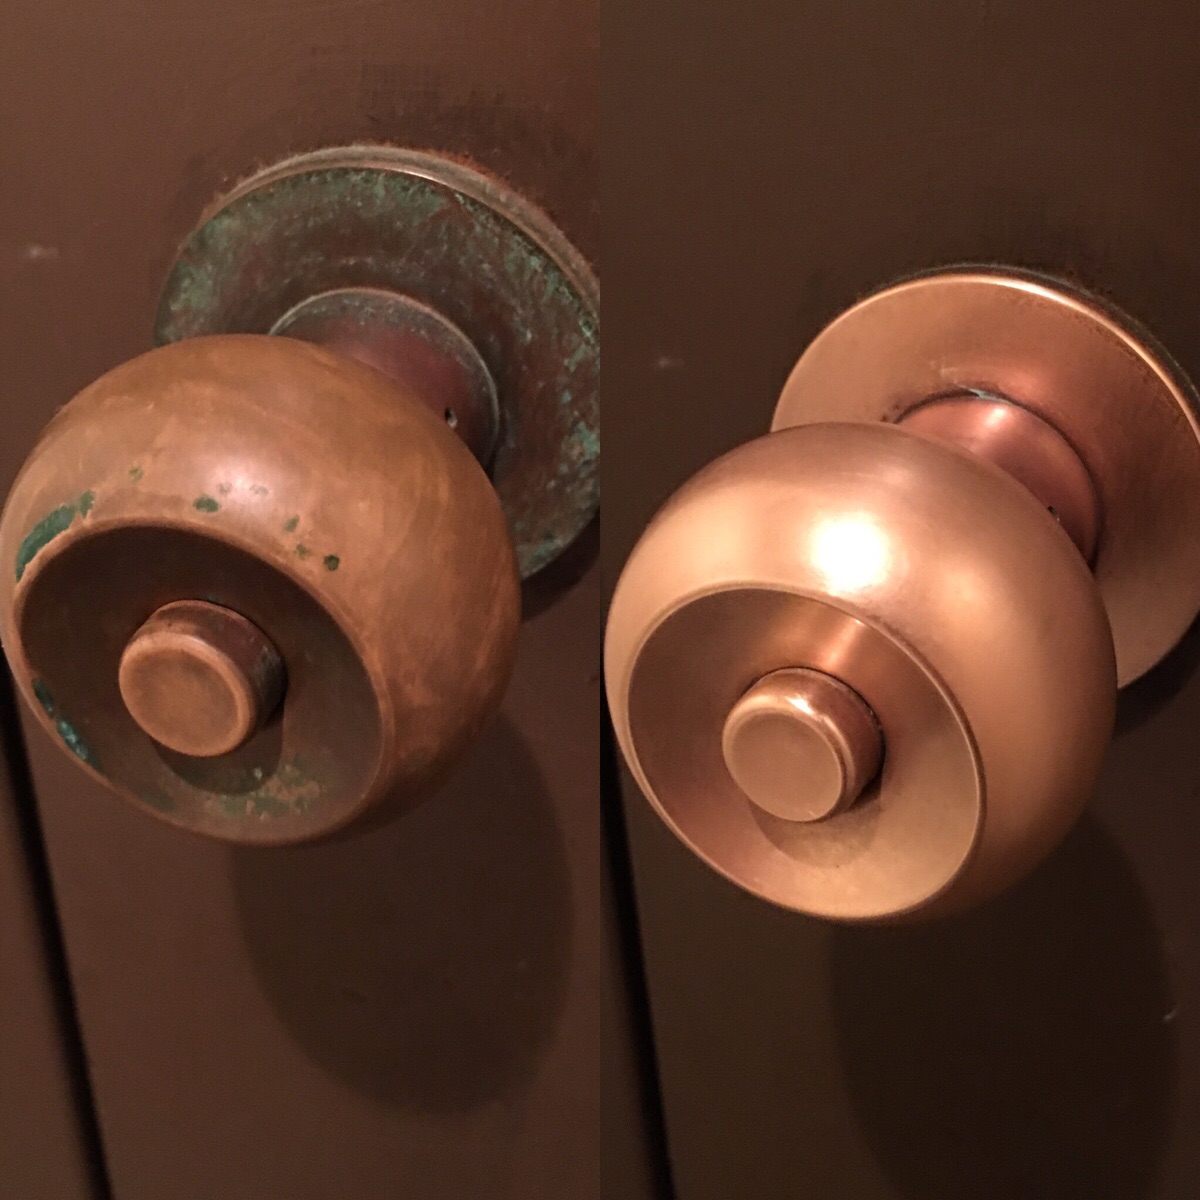 before vs after cleaning shots - polished door knobs